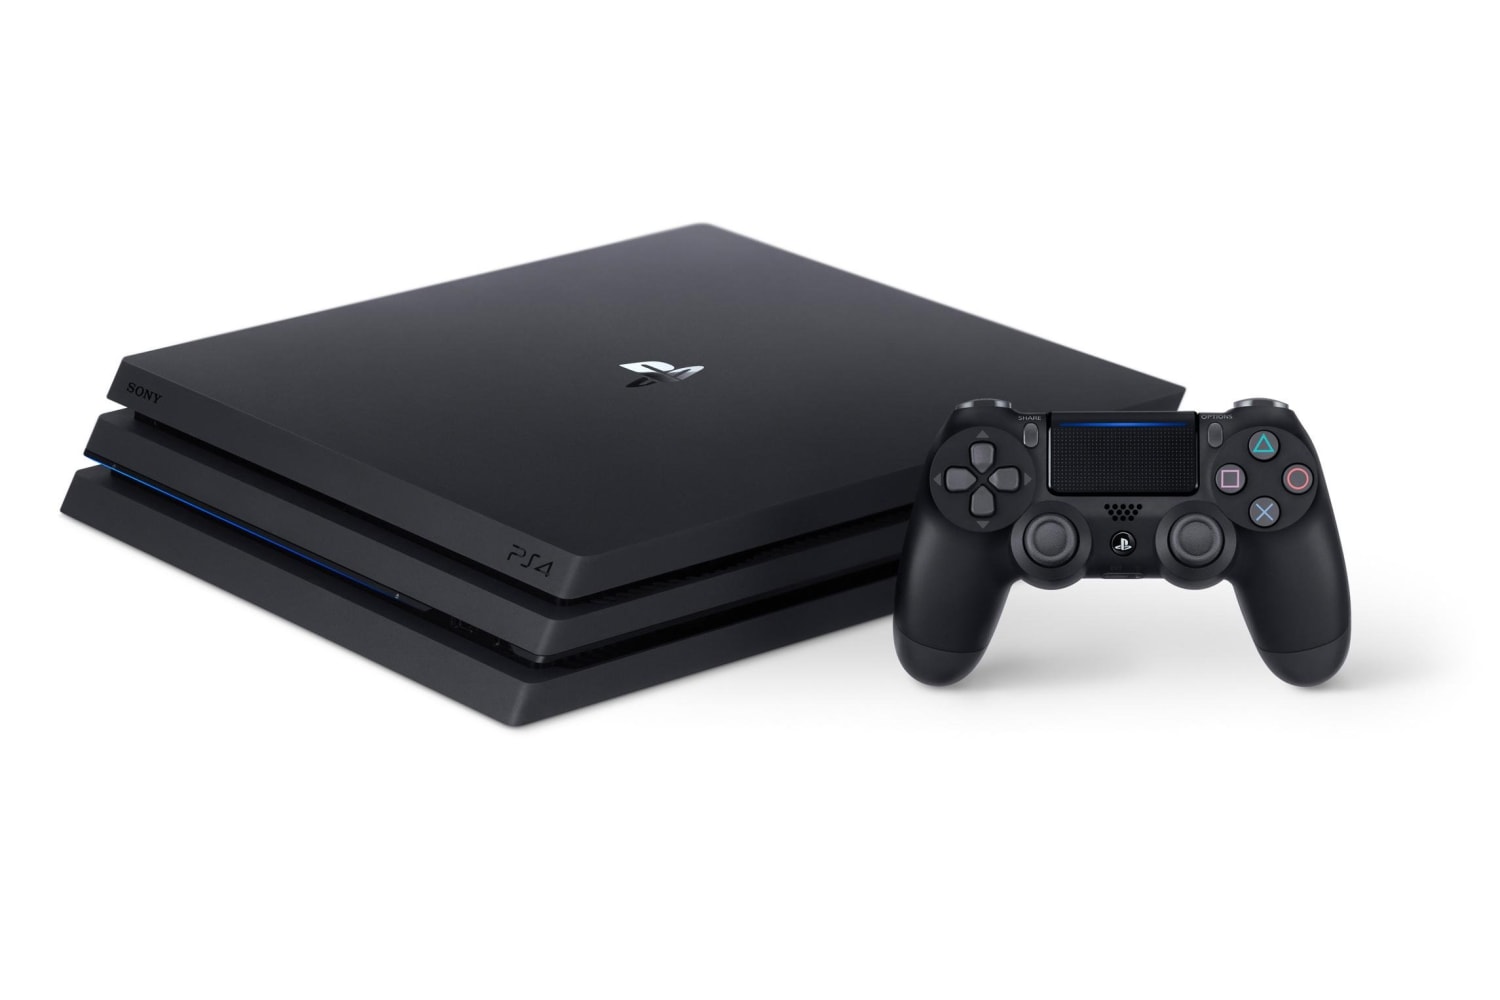 PS4 Pro 4K: 6 games we want to play